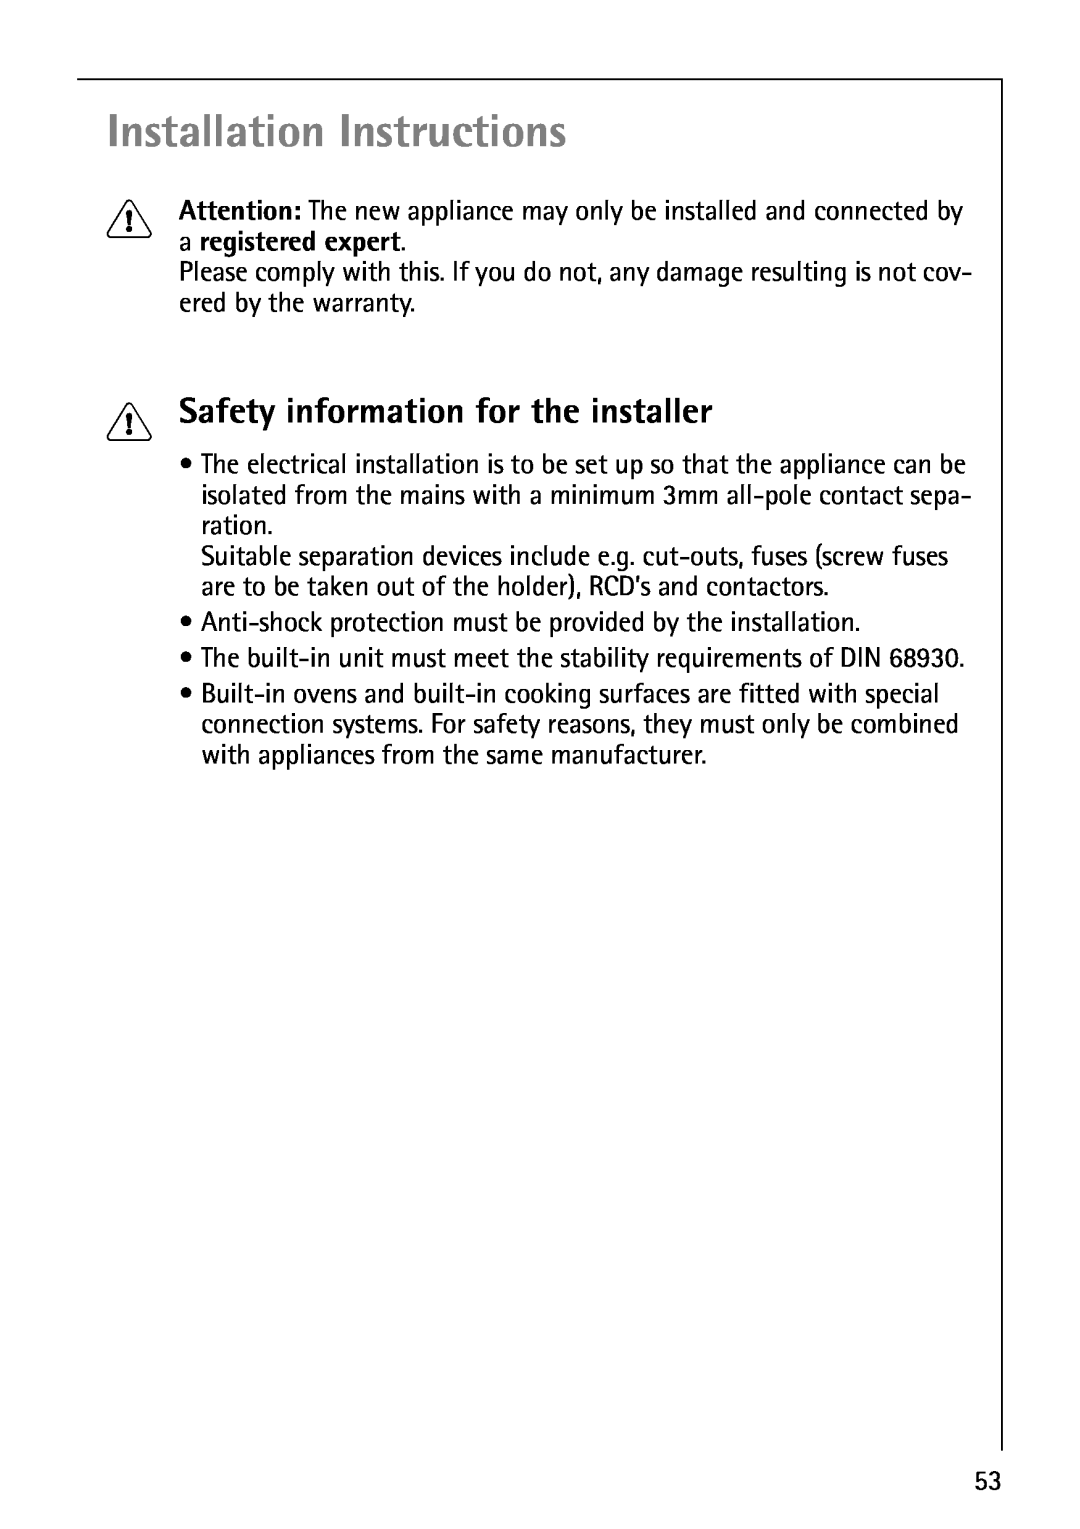 Electrolux B5741-4 manual Installation Instructions, Safety information for the installer, a registered expert 